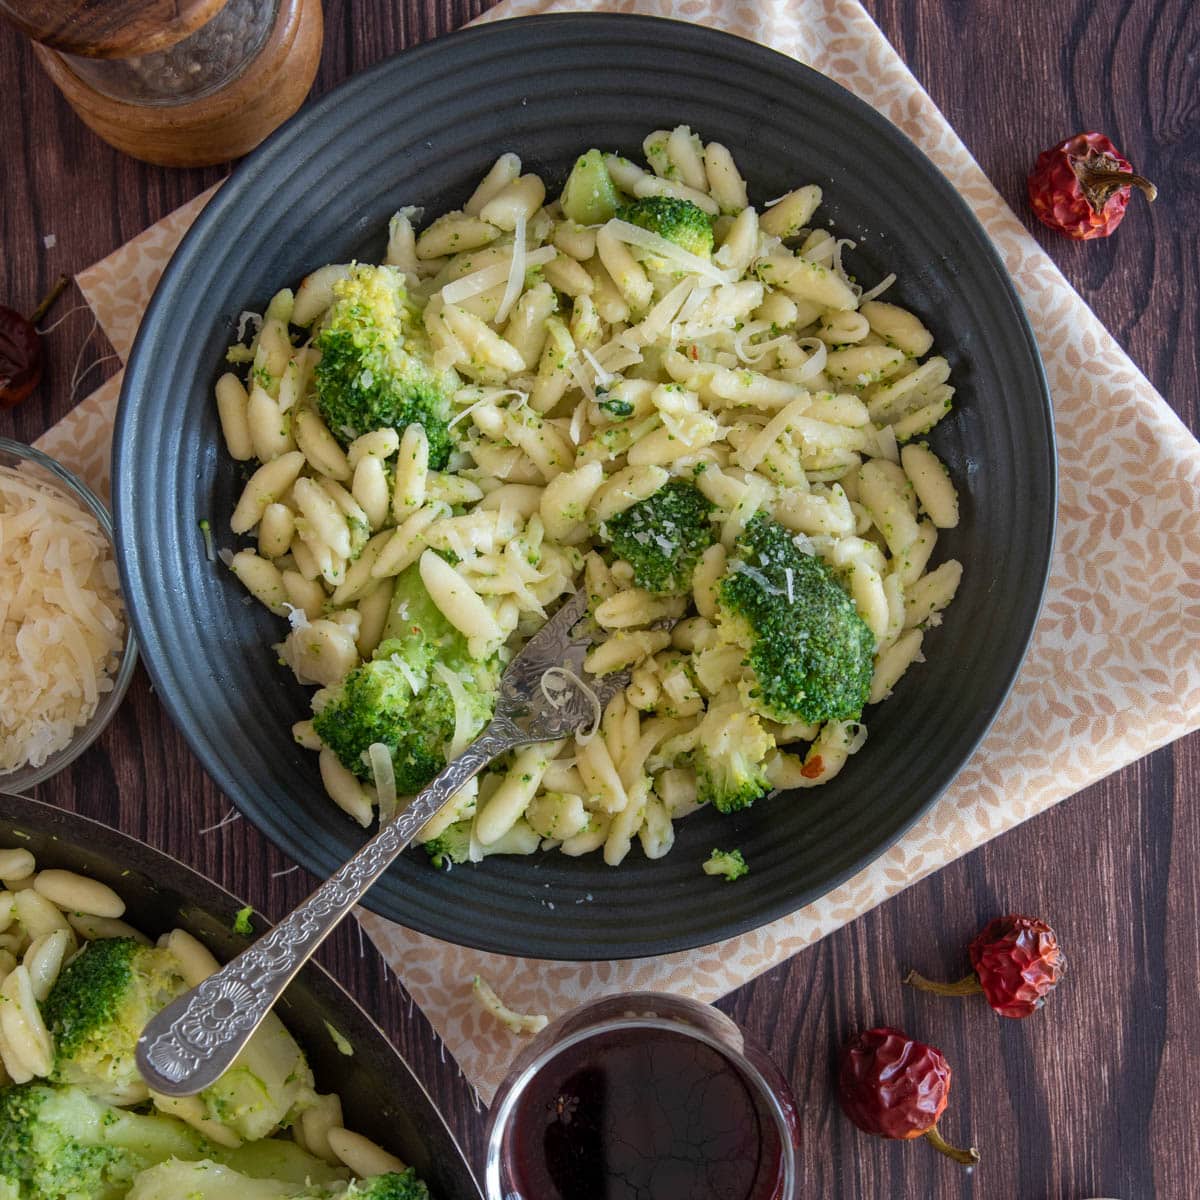 https://yourguardianchef.com/wp-content/uploads/2022/11/Cavatelli-and-broccoli-2.jpg